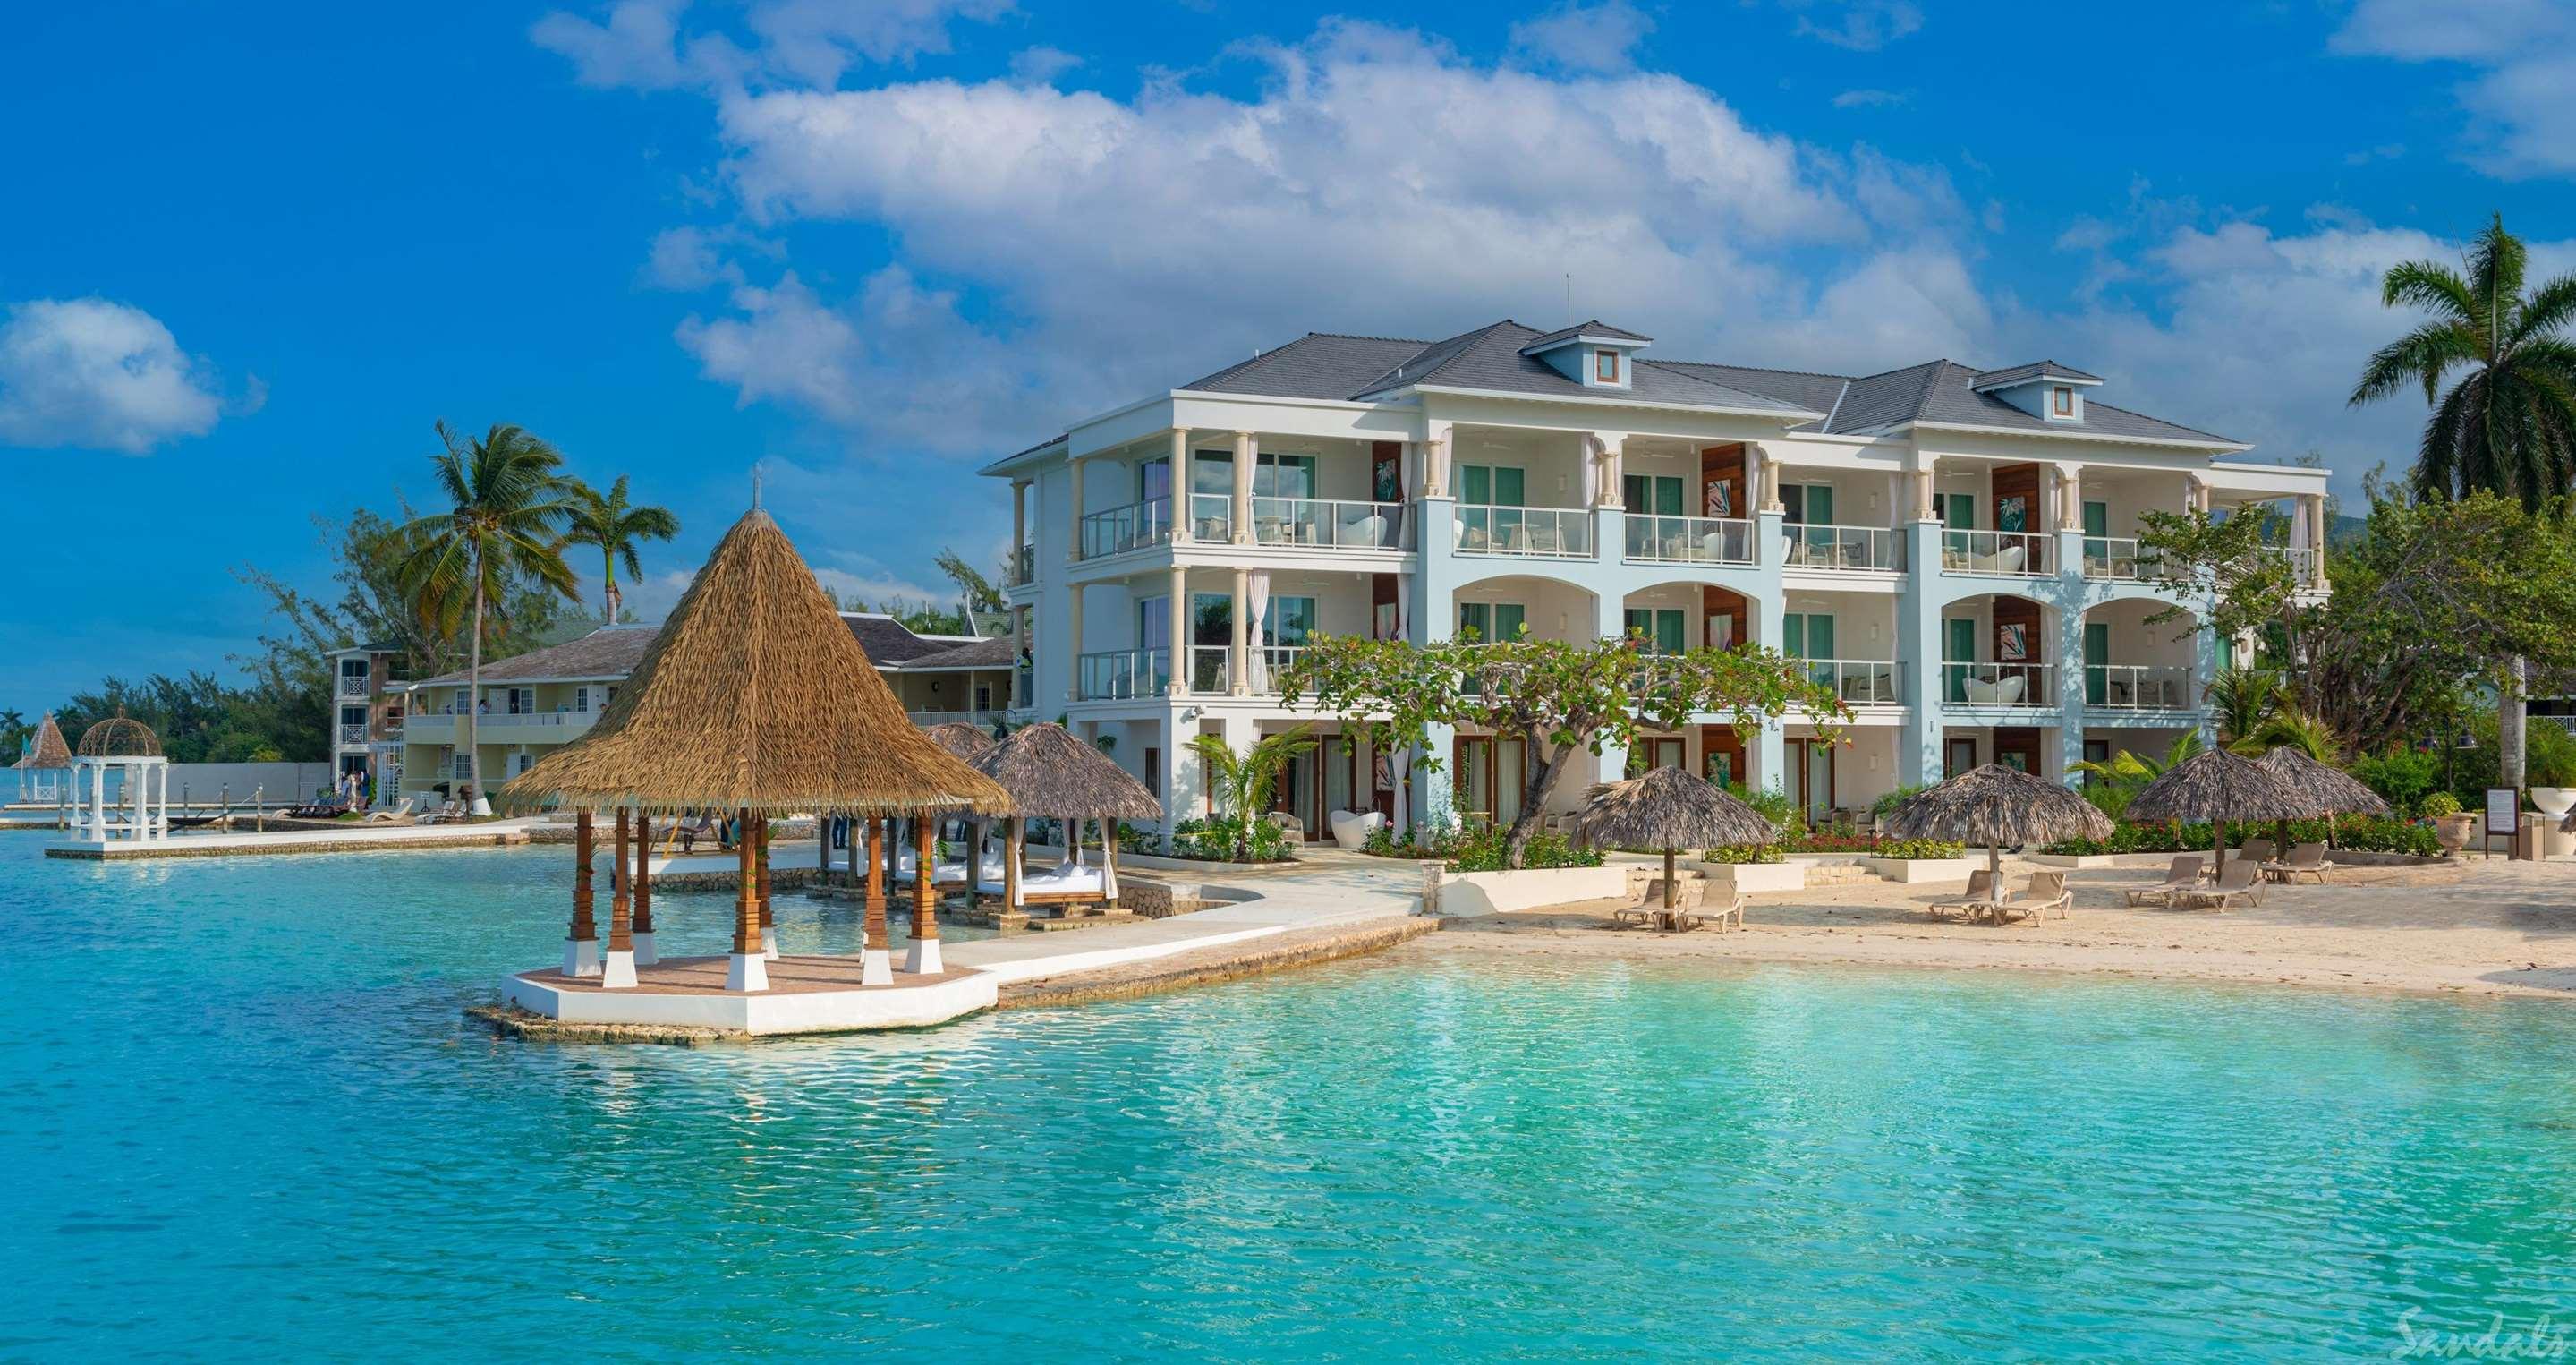 The Best Sandals Resort in Jamaica: A Review Comparison | Spot Cool Stuff:  Travel